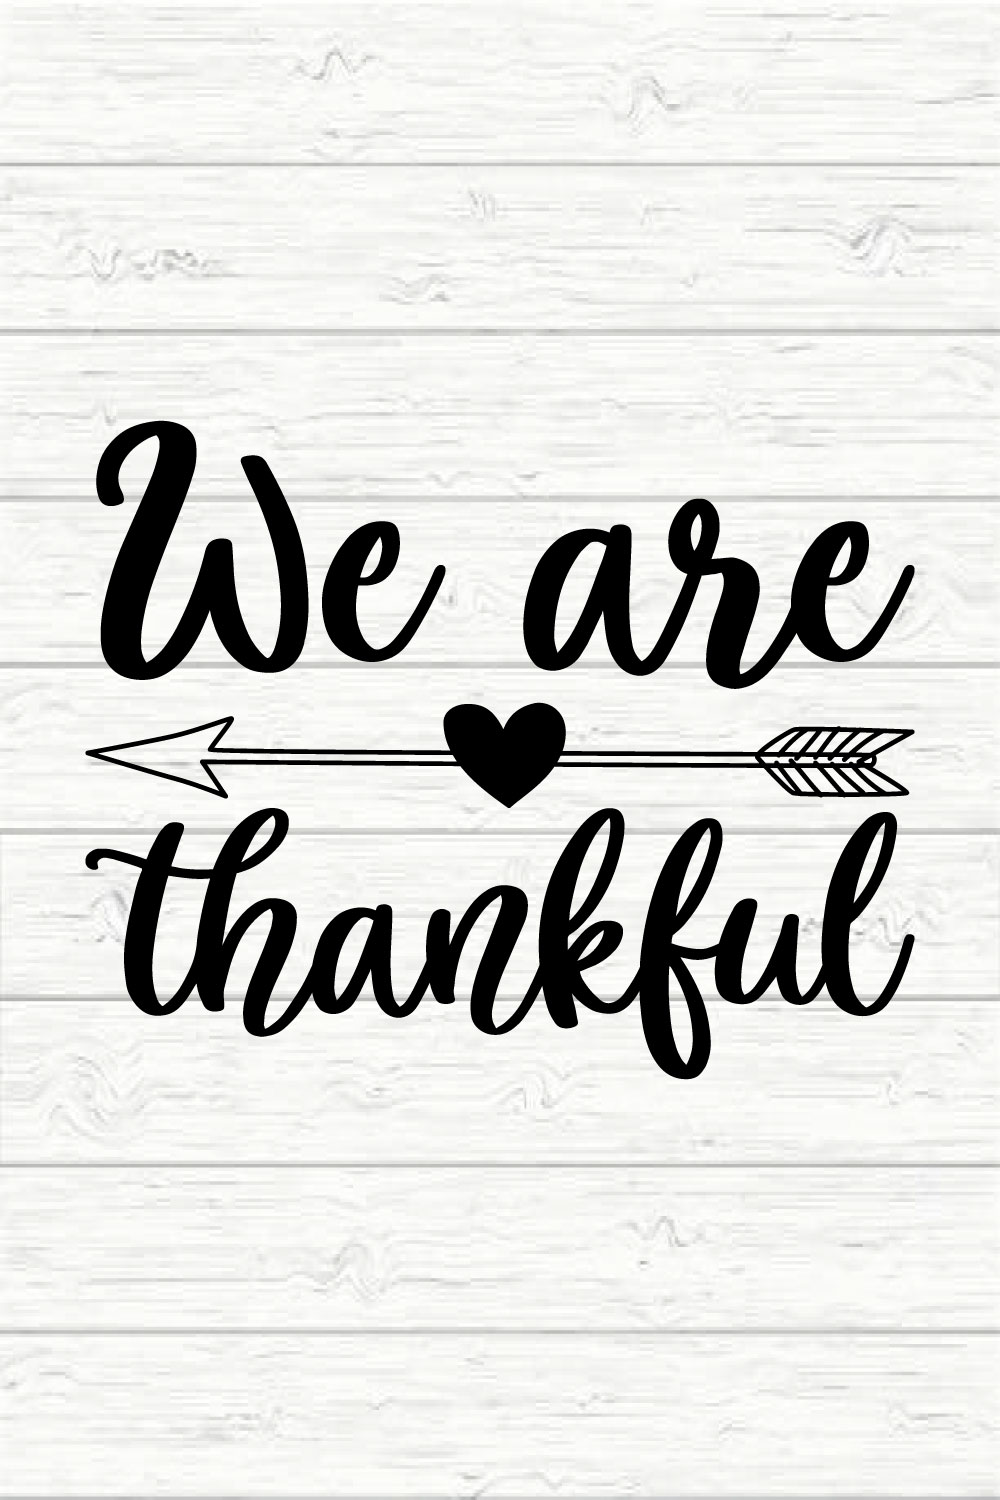 We are thankful pinterest preview image.